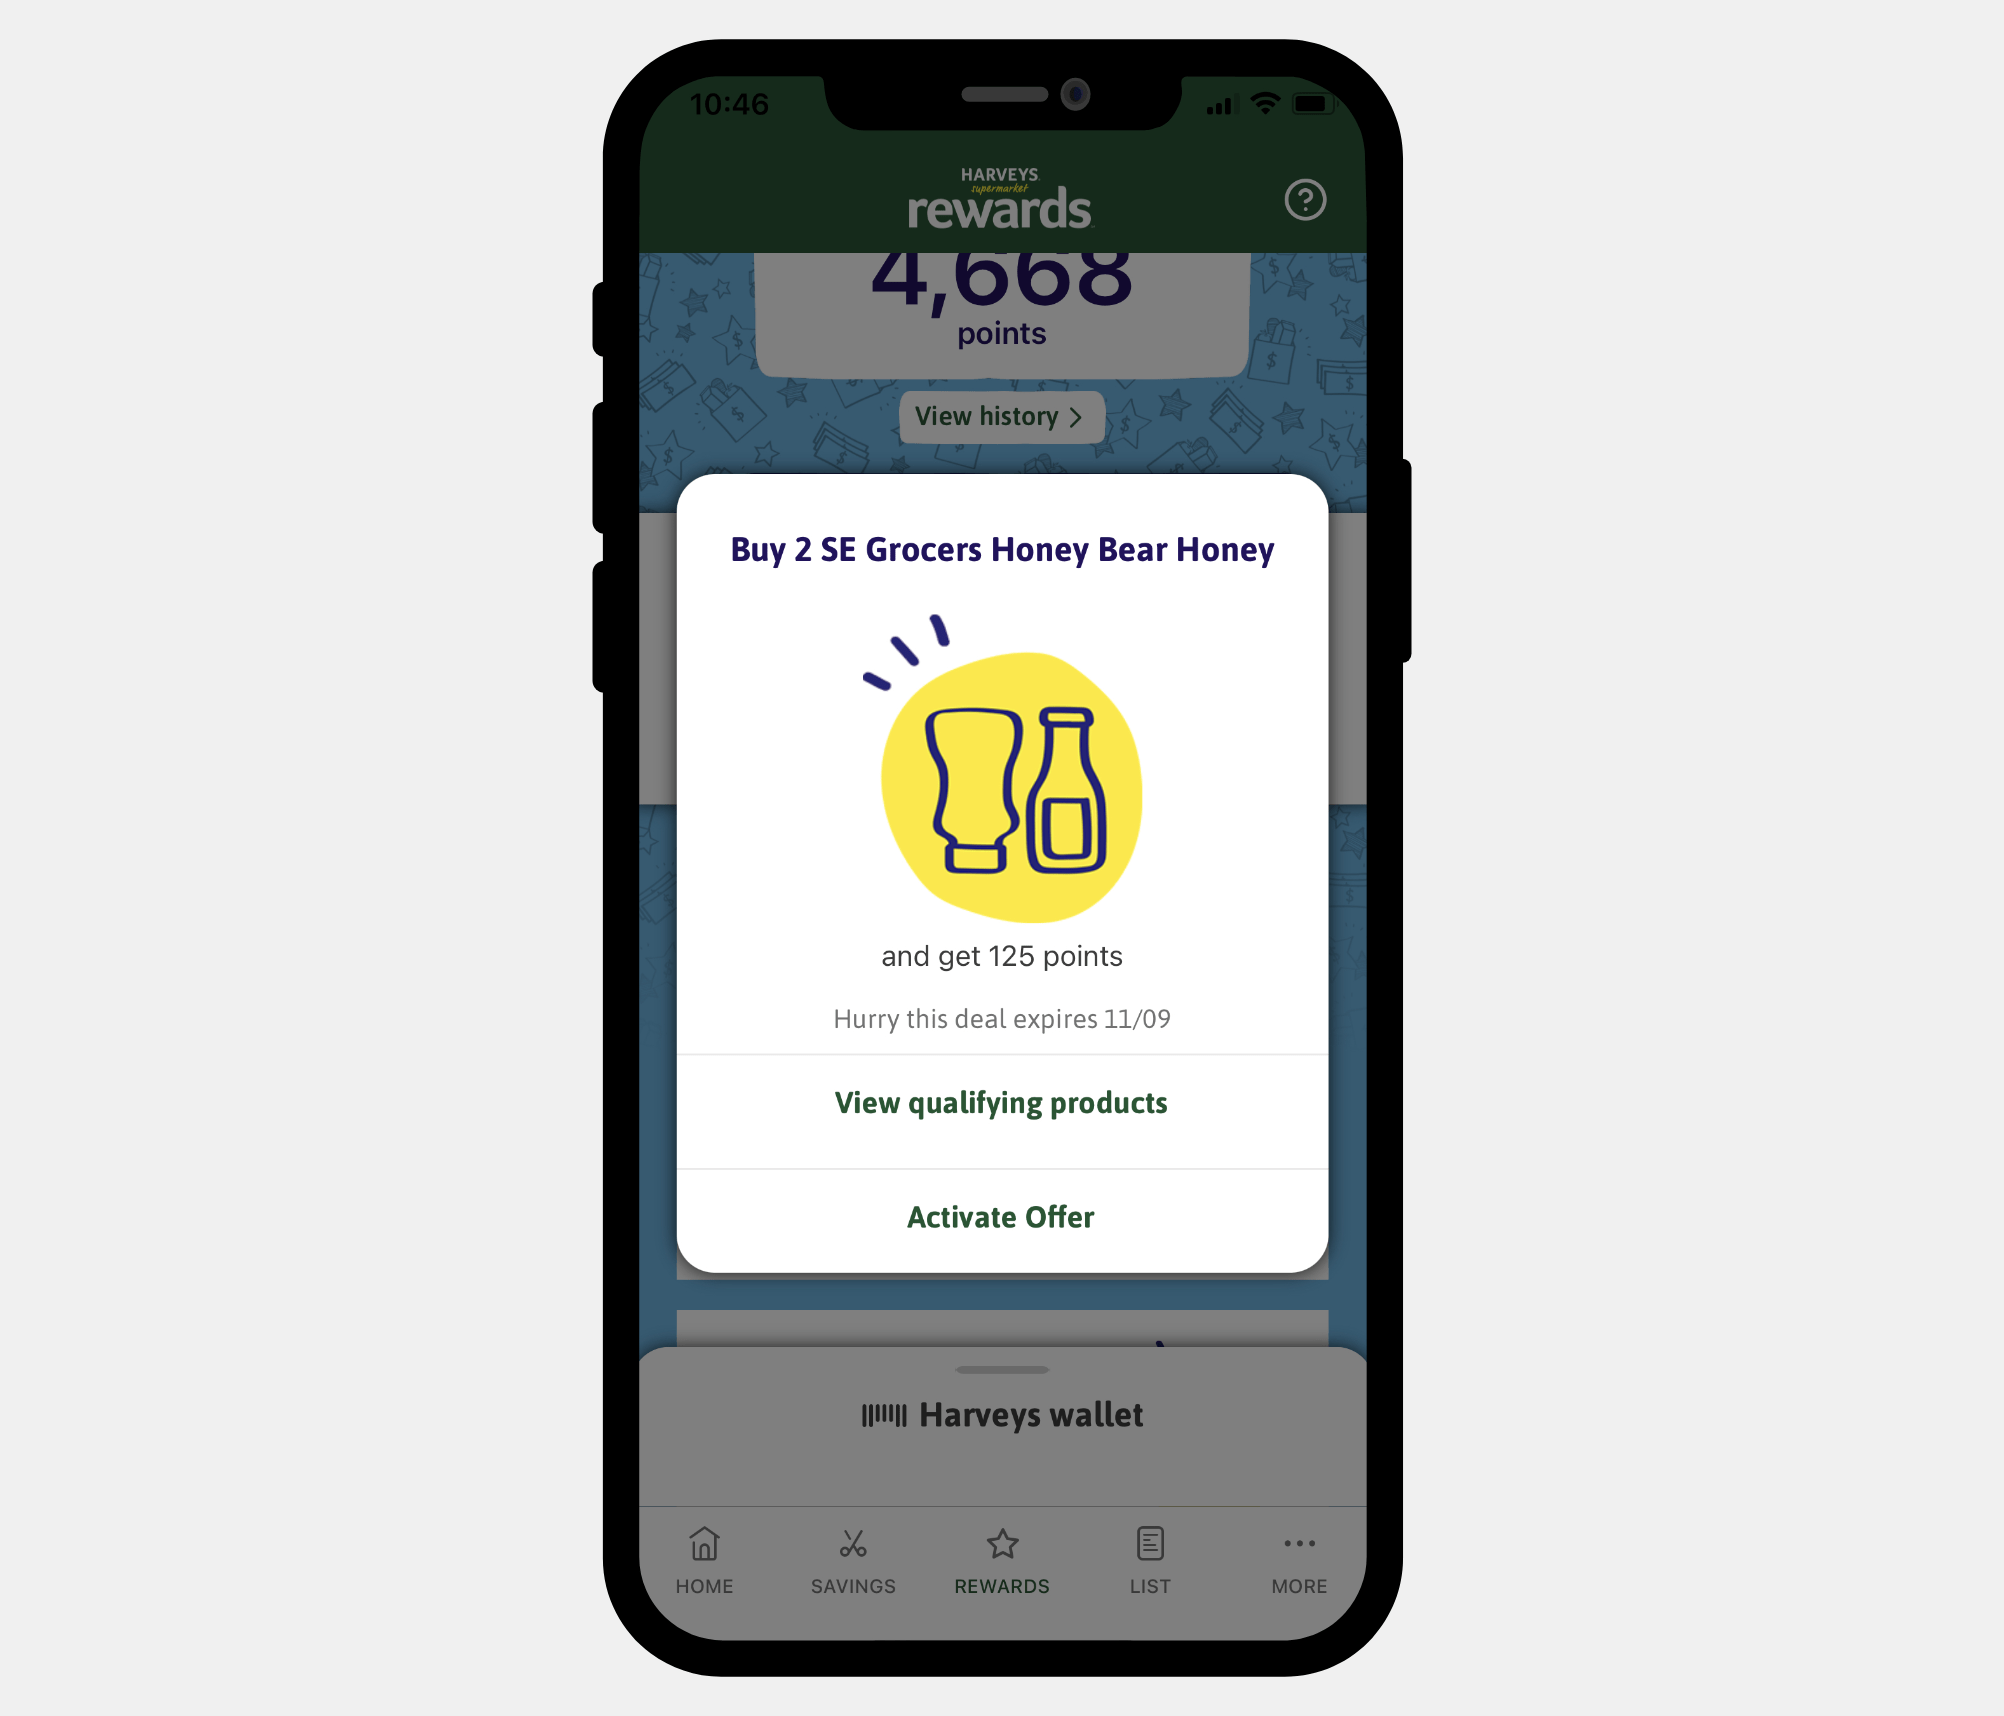 Image of a phone using the rewards offers feature on the Harveys app